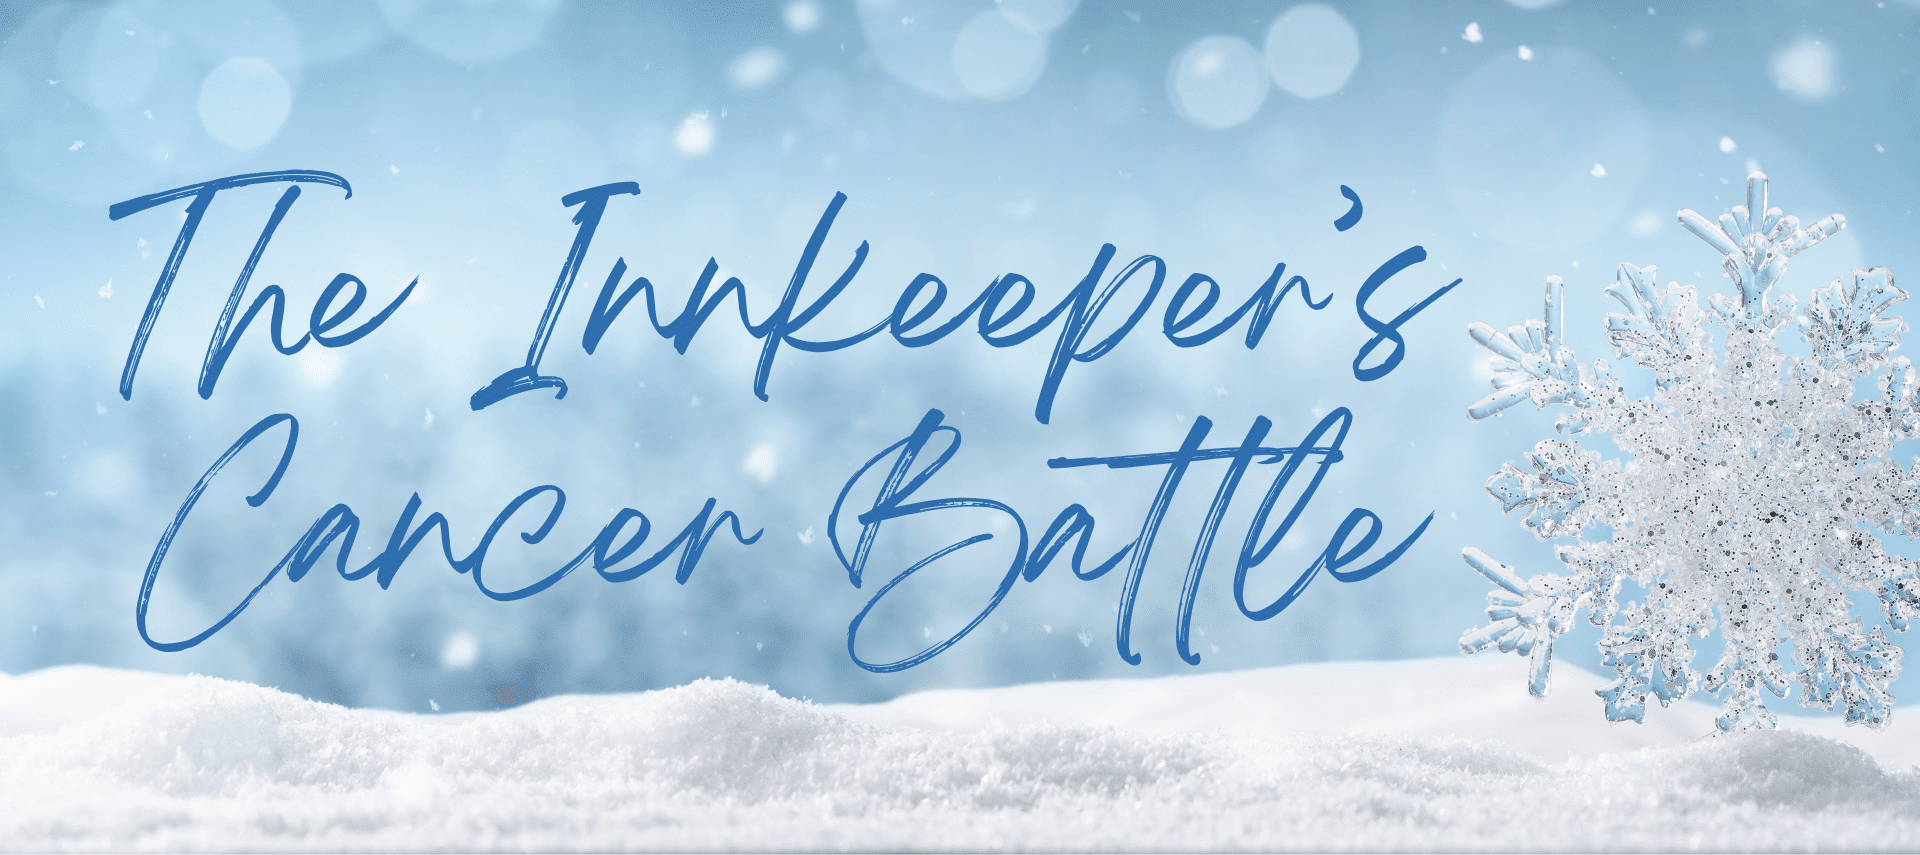 The Innkeeper's Cancer Battle graphic